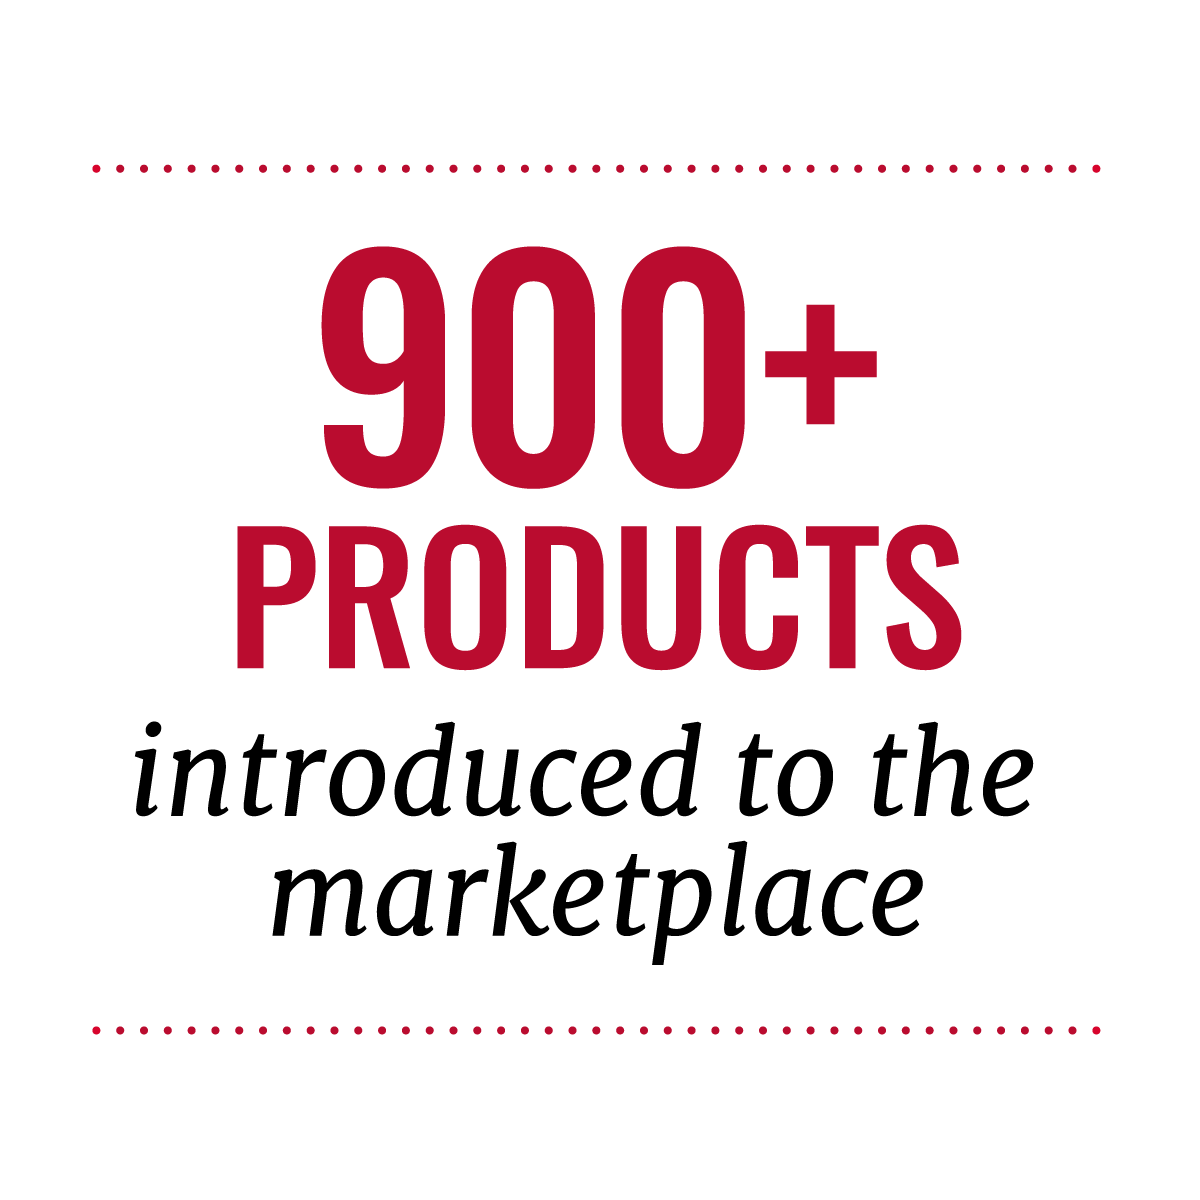 900+ products introduced to the marketplace